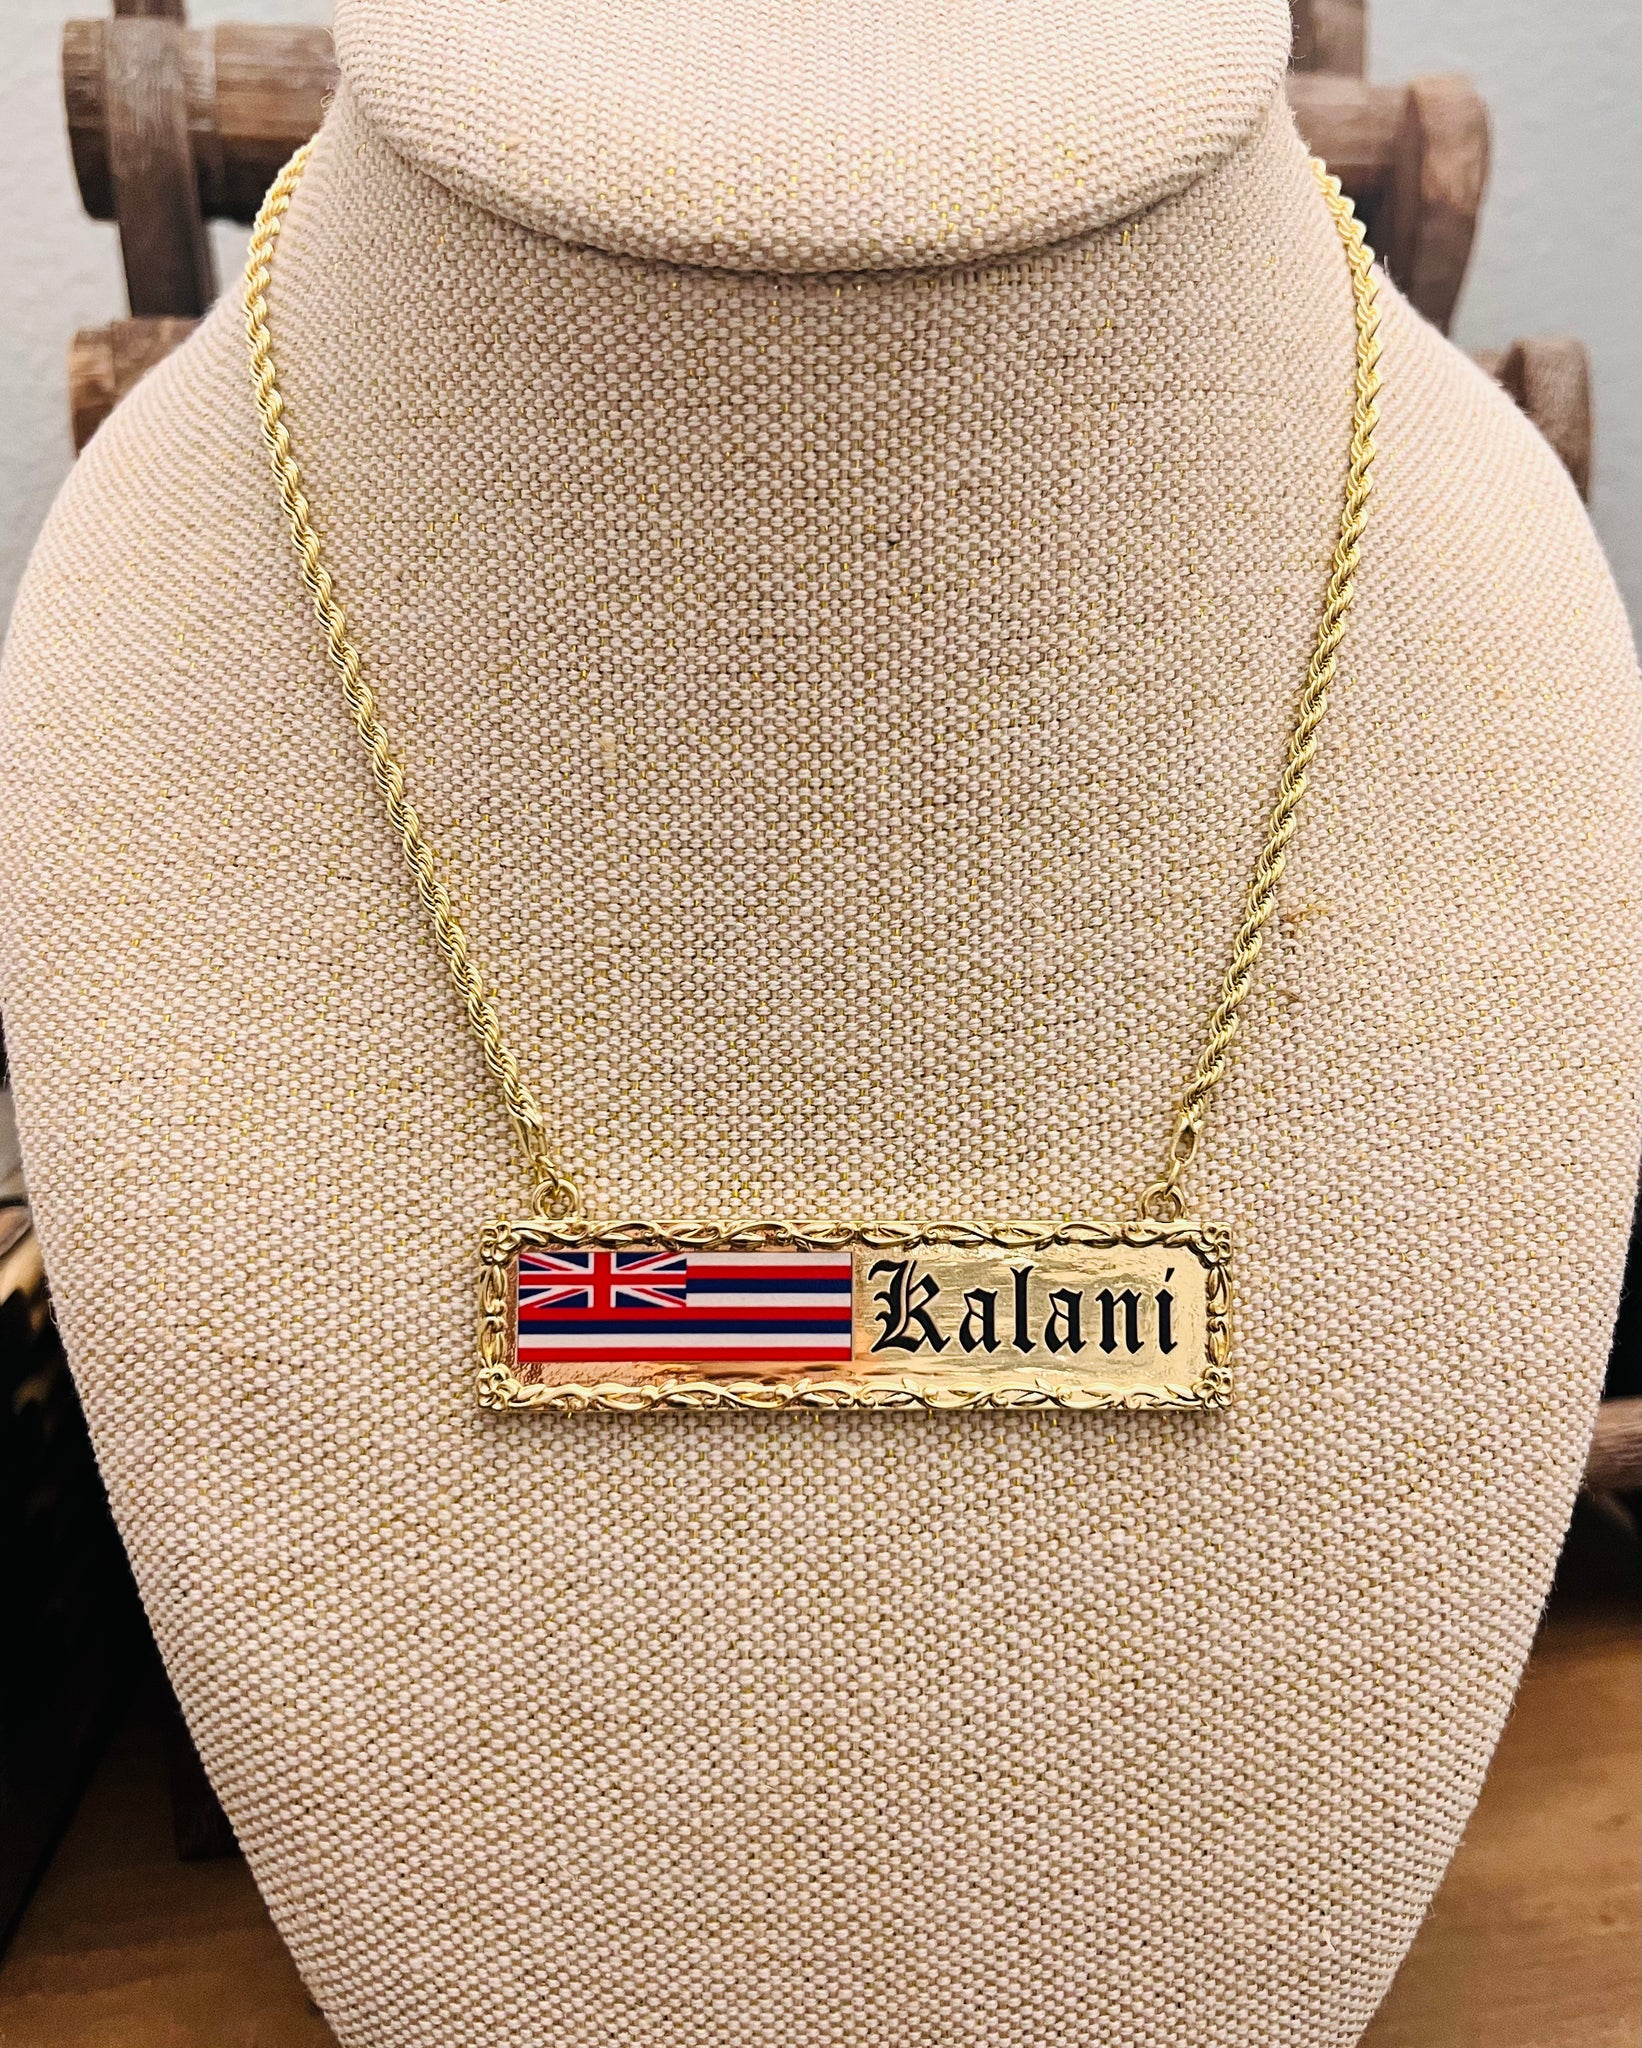 NEW Design! YOUR Name + Flag Necklace